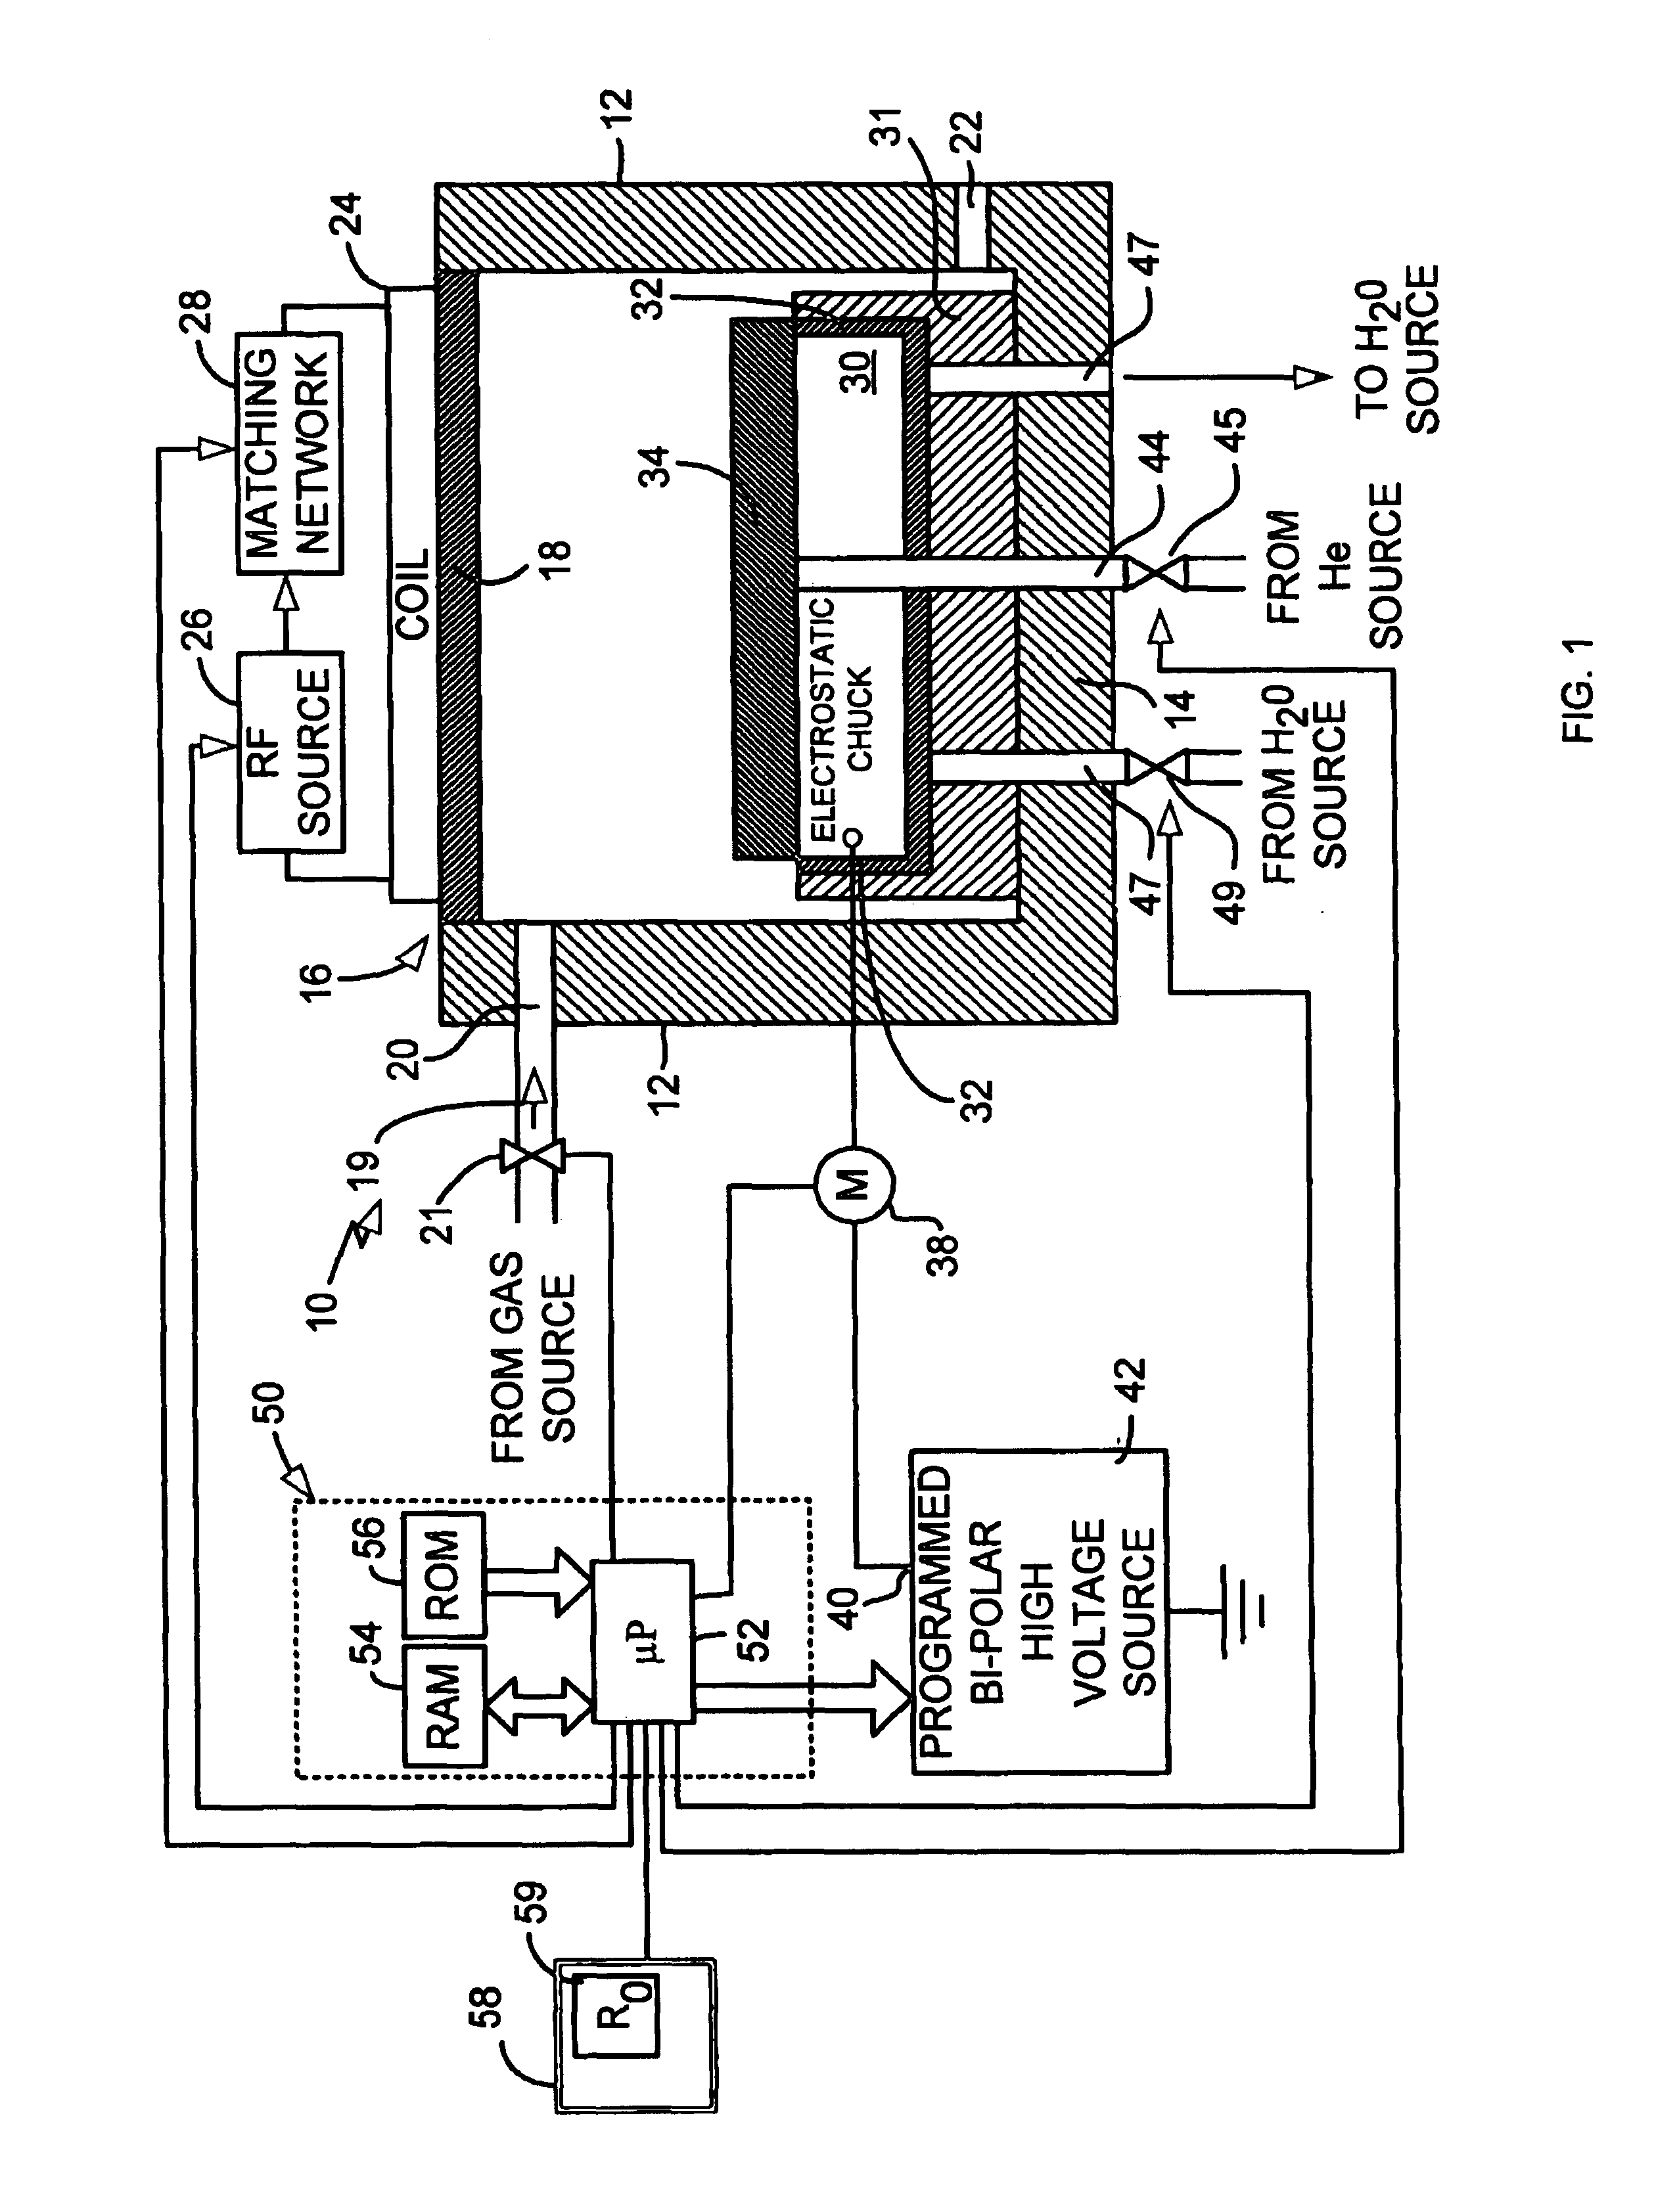 System and method for dechucking a workpiece from an electrostatic chuck